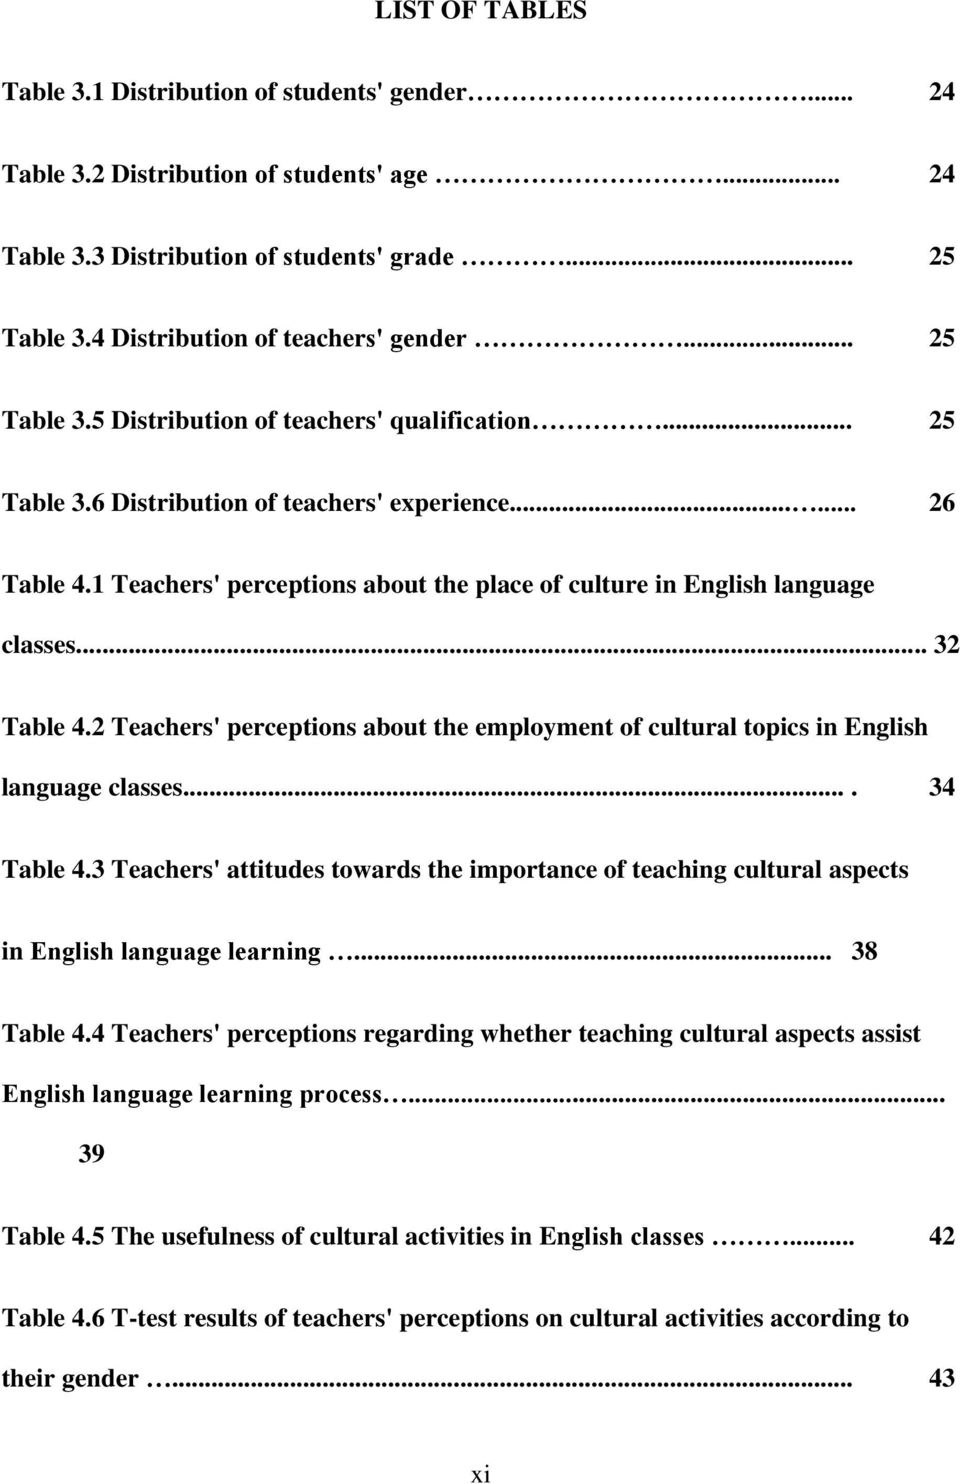 1 Teachers' perceptions about the place of culture in English language classes... 32 Table 4.2 Teachers' perceptions about the employment of cultural topics in English language classes.... 34 Table 4.